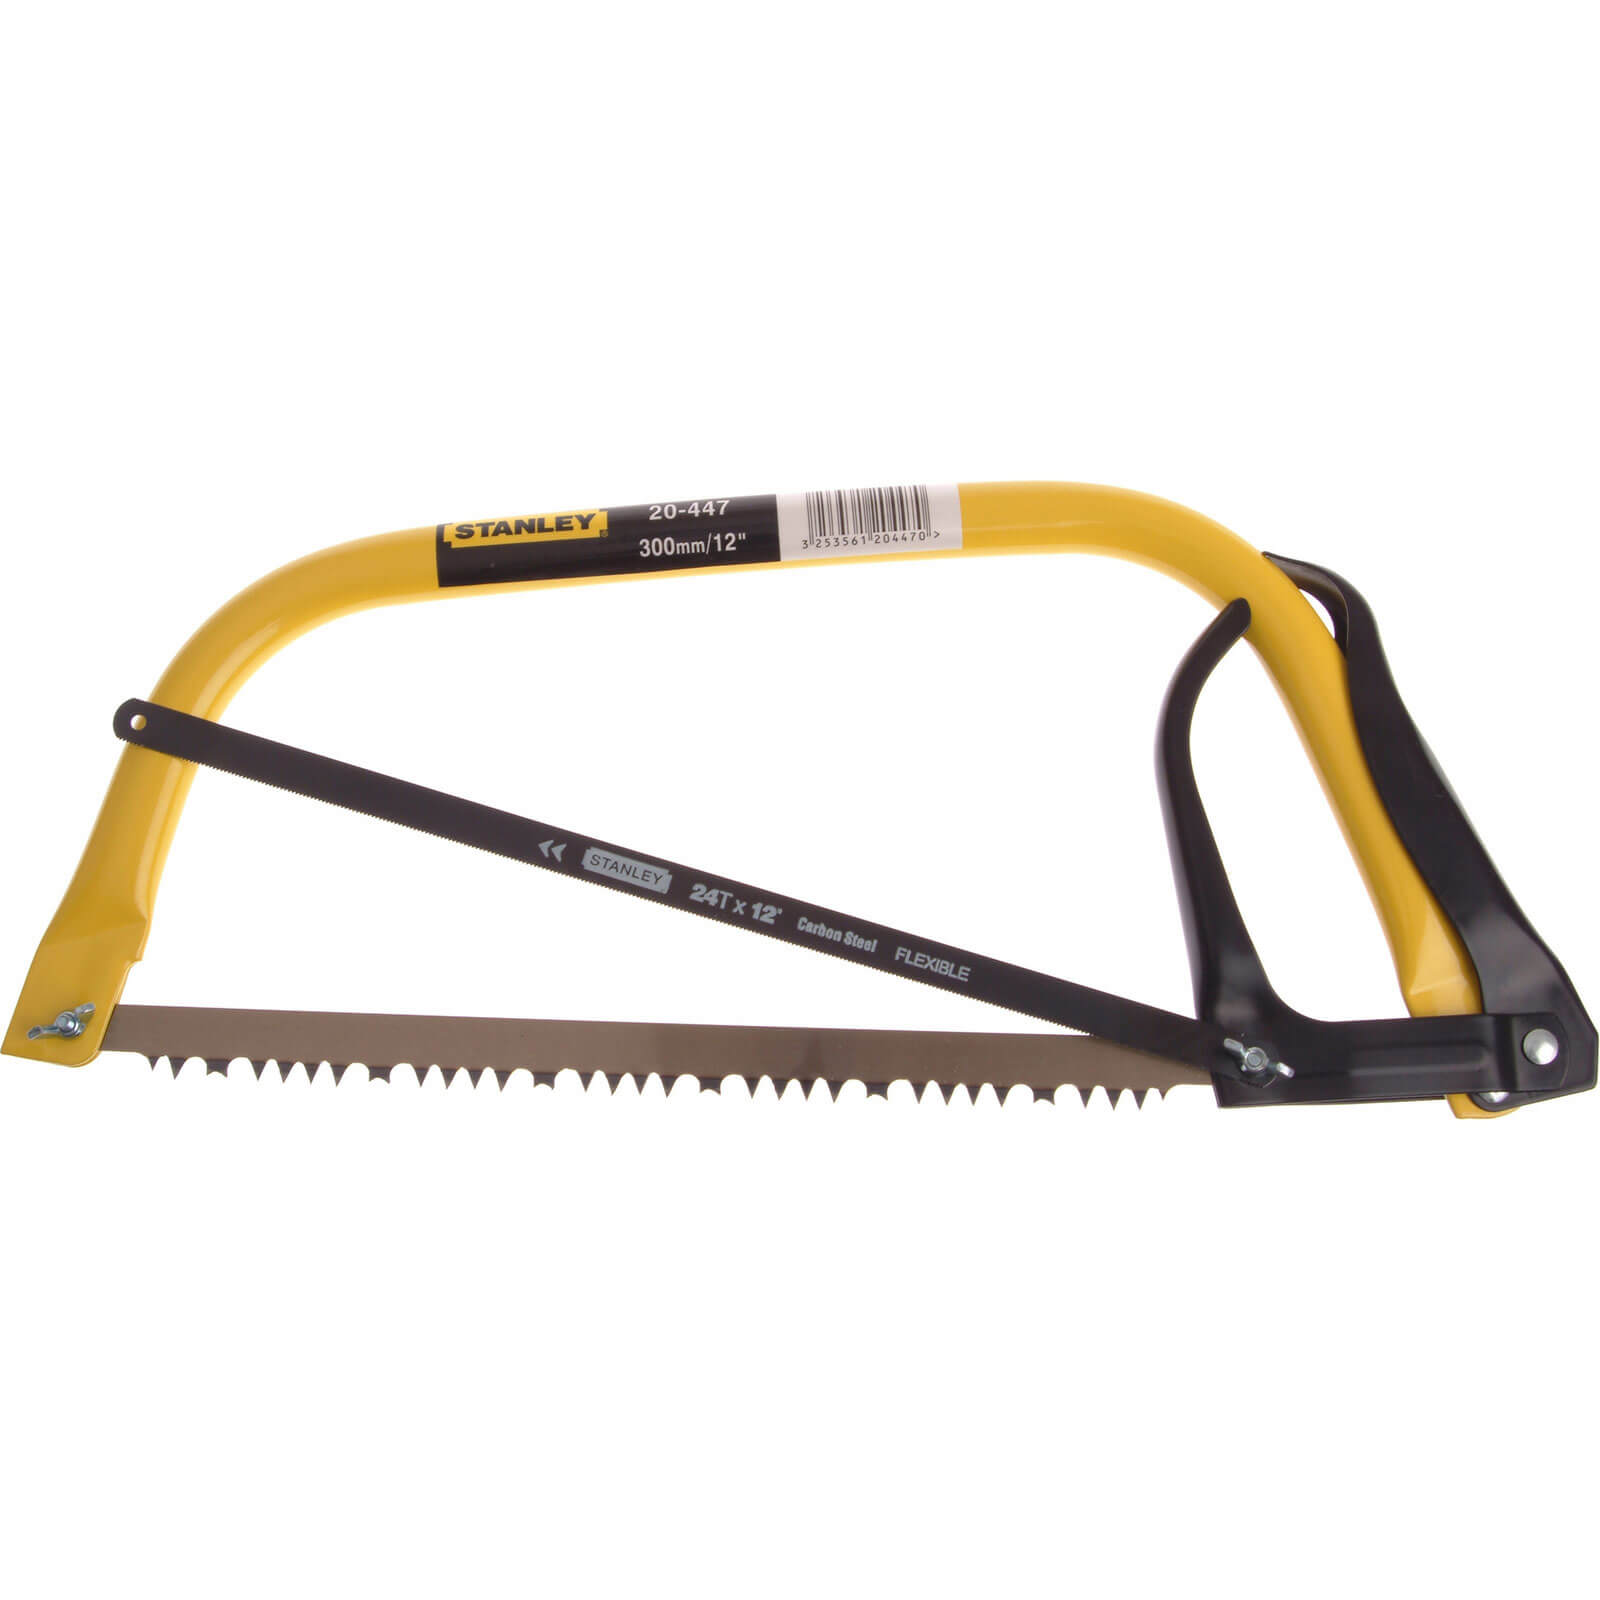 Image of Stanley 2 in 1 Bow Saw and Hacksaw 12" / 300mm